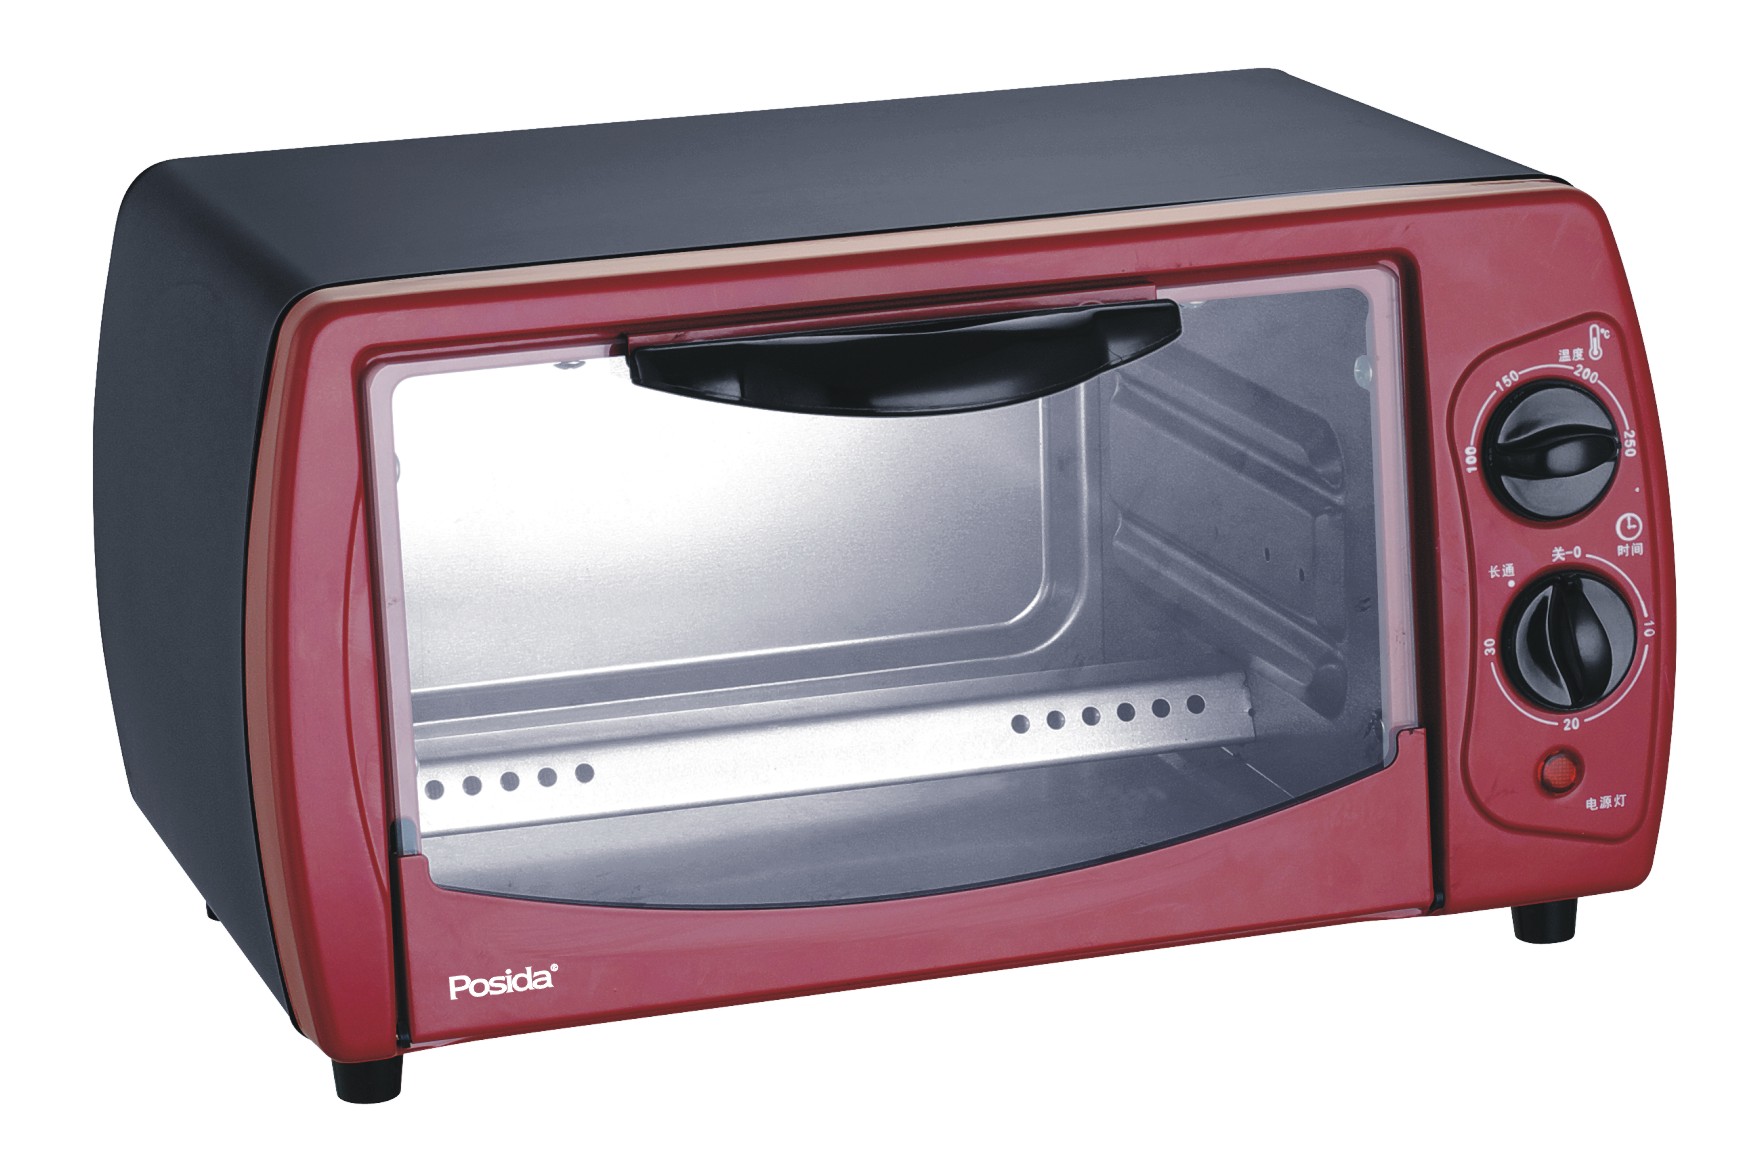 Shionable electric oven